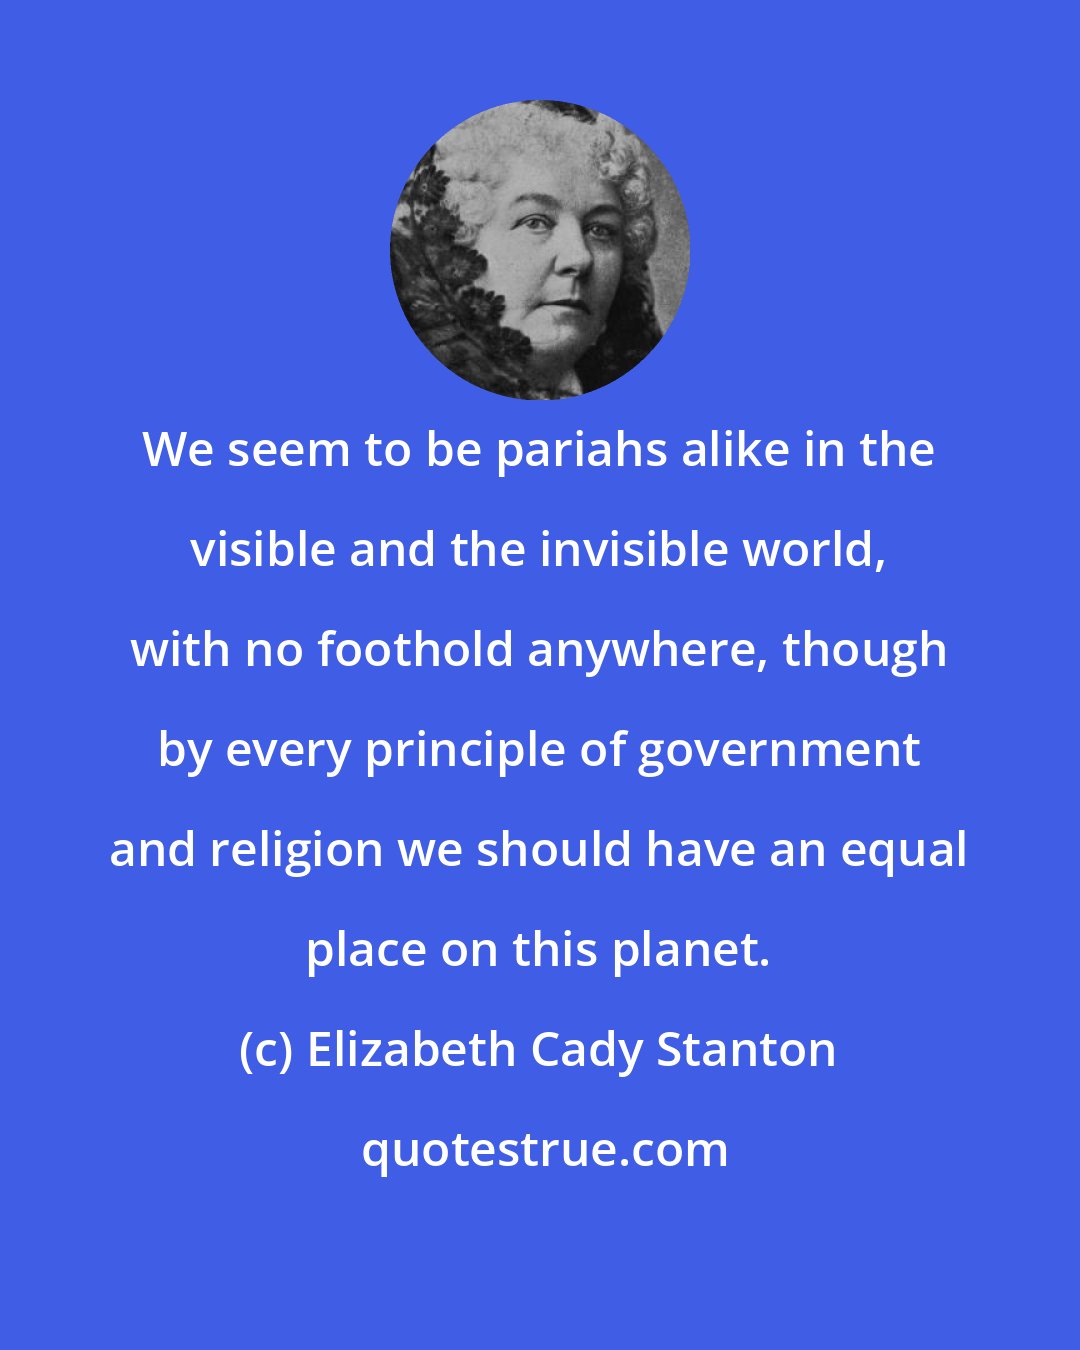 Elizabeth Cady Stanton: We seem to be pariahs alike in the visible and the invisible world, with no foothold anywhere, though by every principle of government and religion we should have an equal place on this planet.